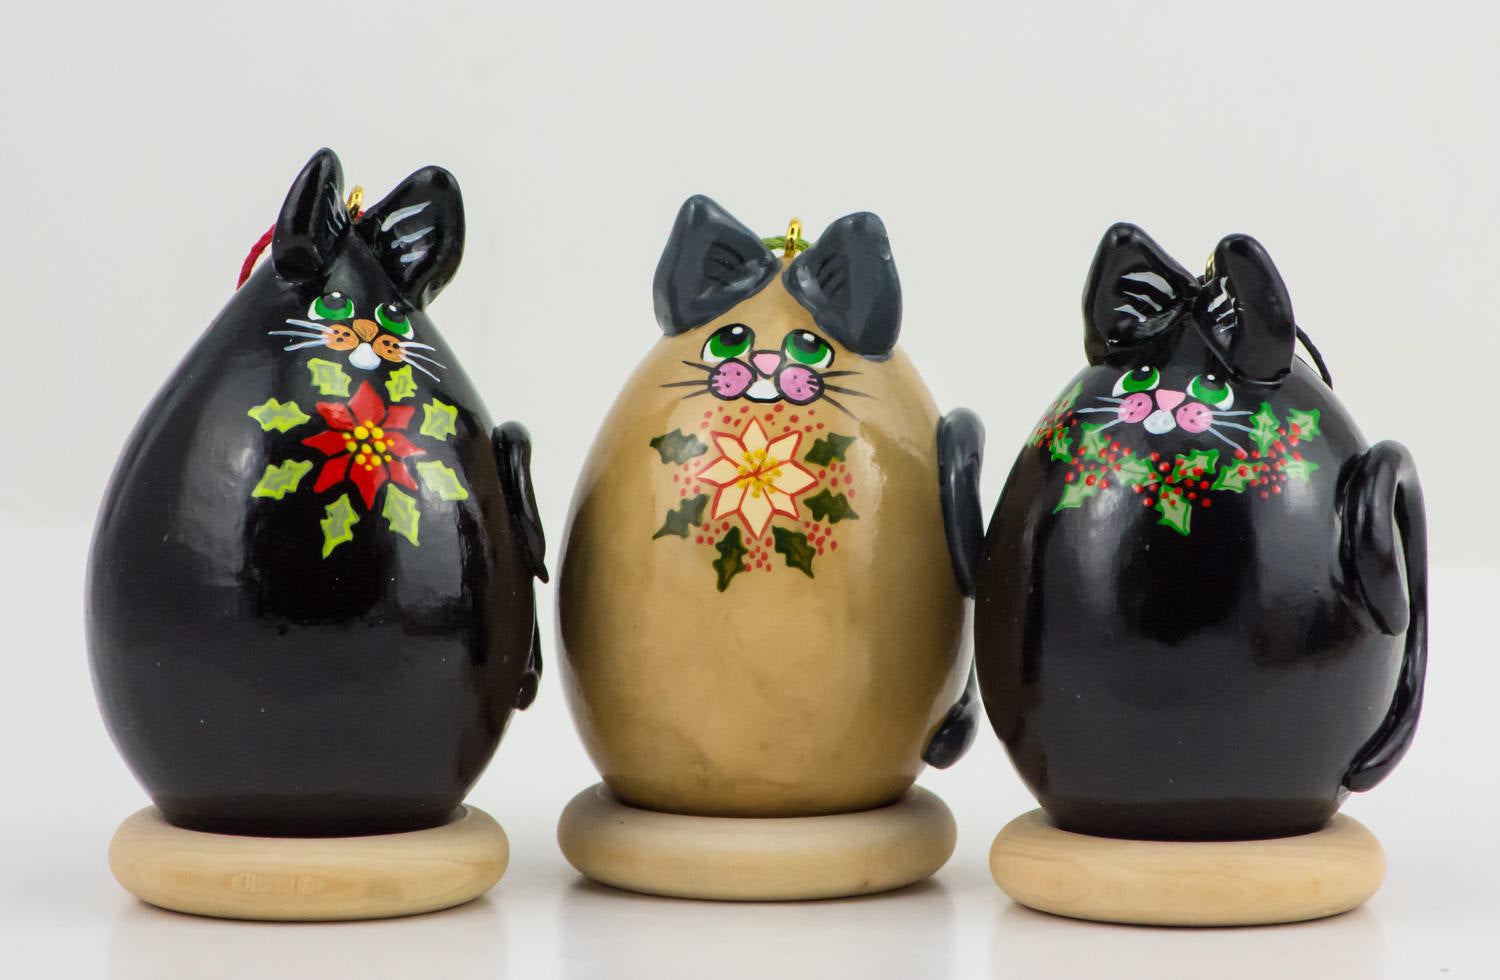 Kitty Cat Gourd Ornament Trio Holly and Poinsettia design - Cat Lover Christmas Gift - Gourdaments